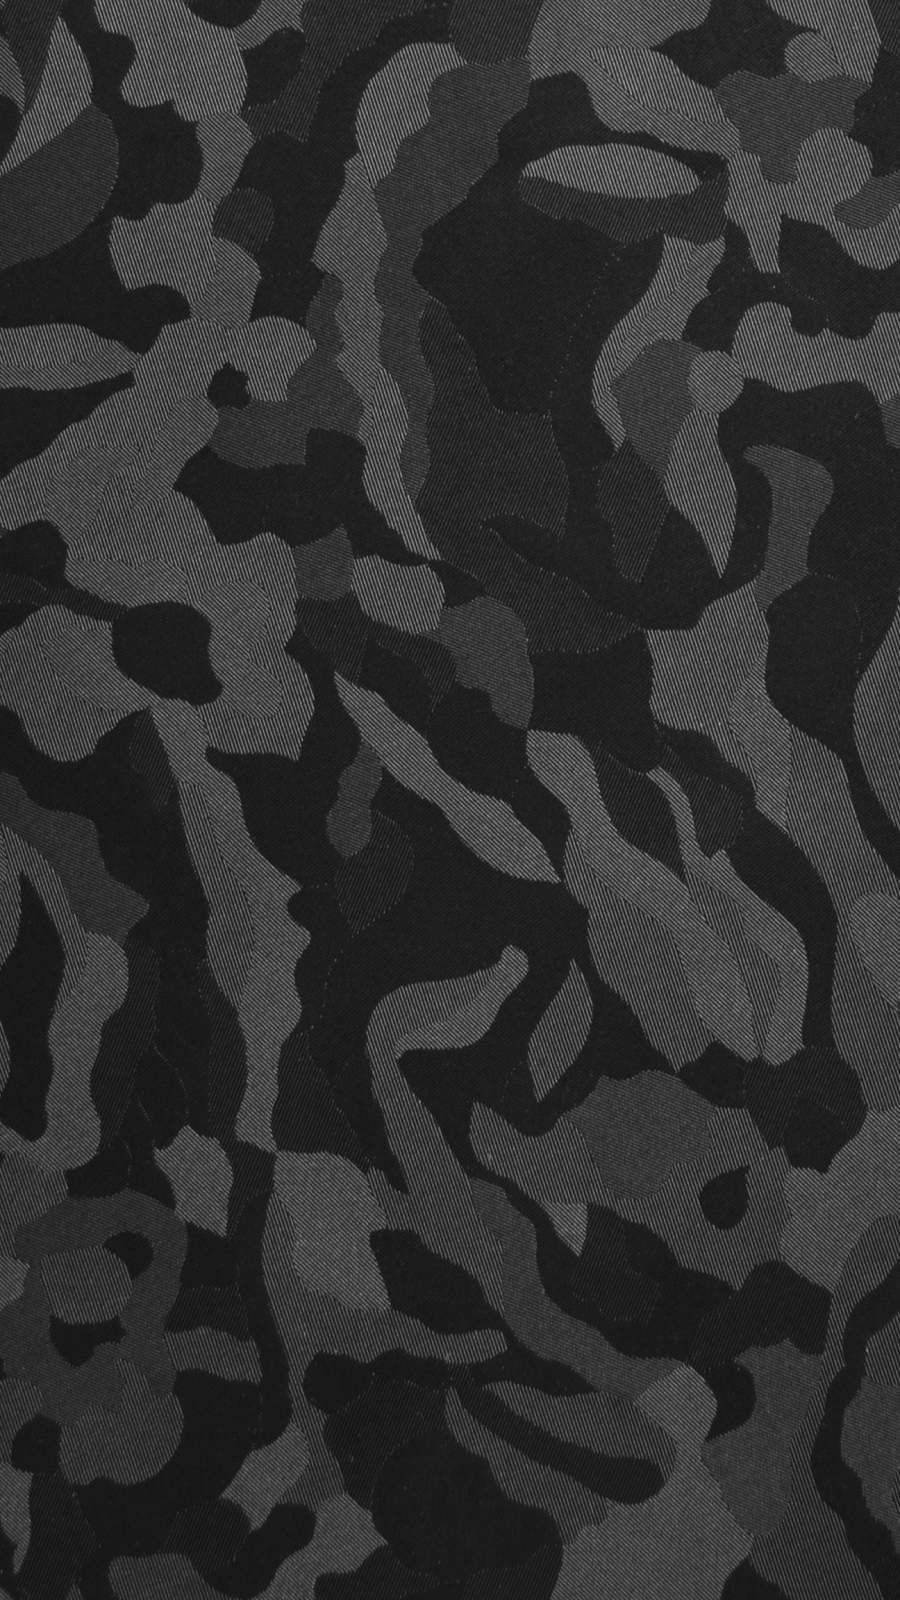 Black Camouflage IPhone Wallpaper Wallpaper. Camo Wallpaper, Camouflage Wallpaper, Black Wallpaper For Mobile